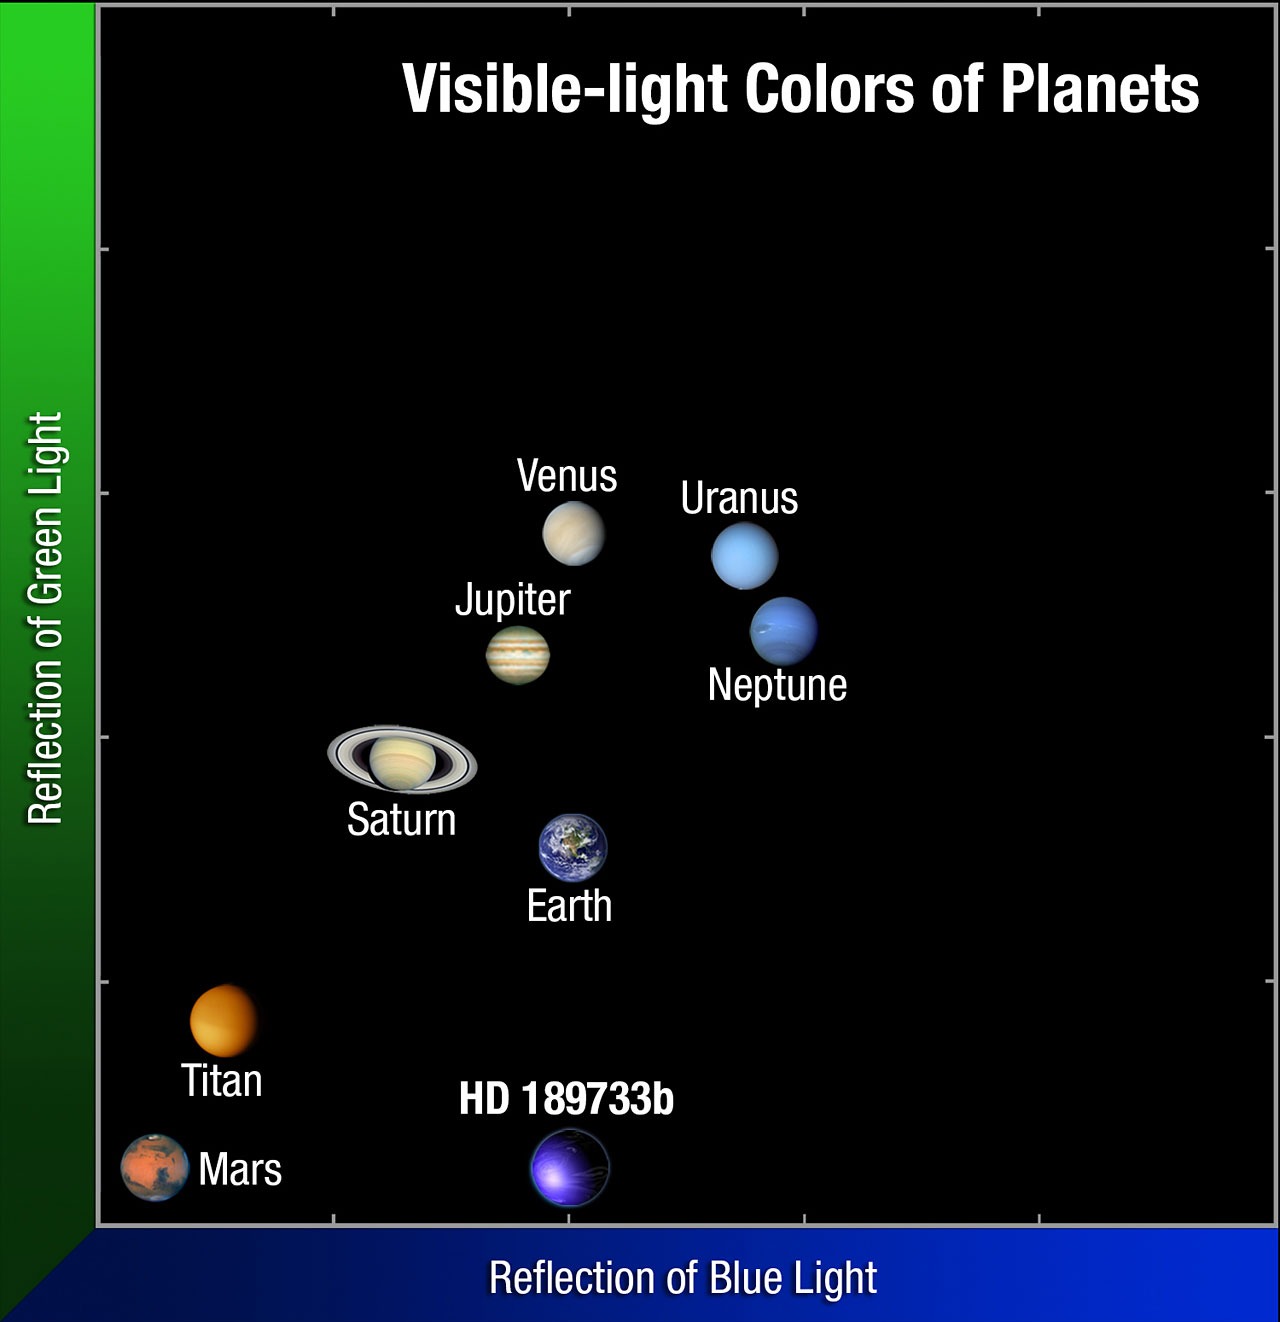 Visible colors of planets